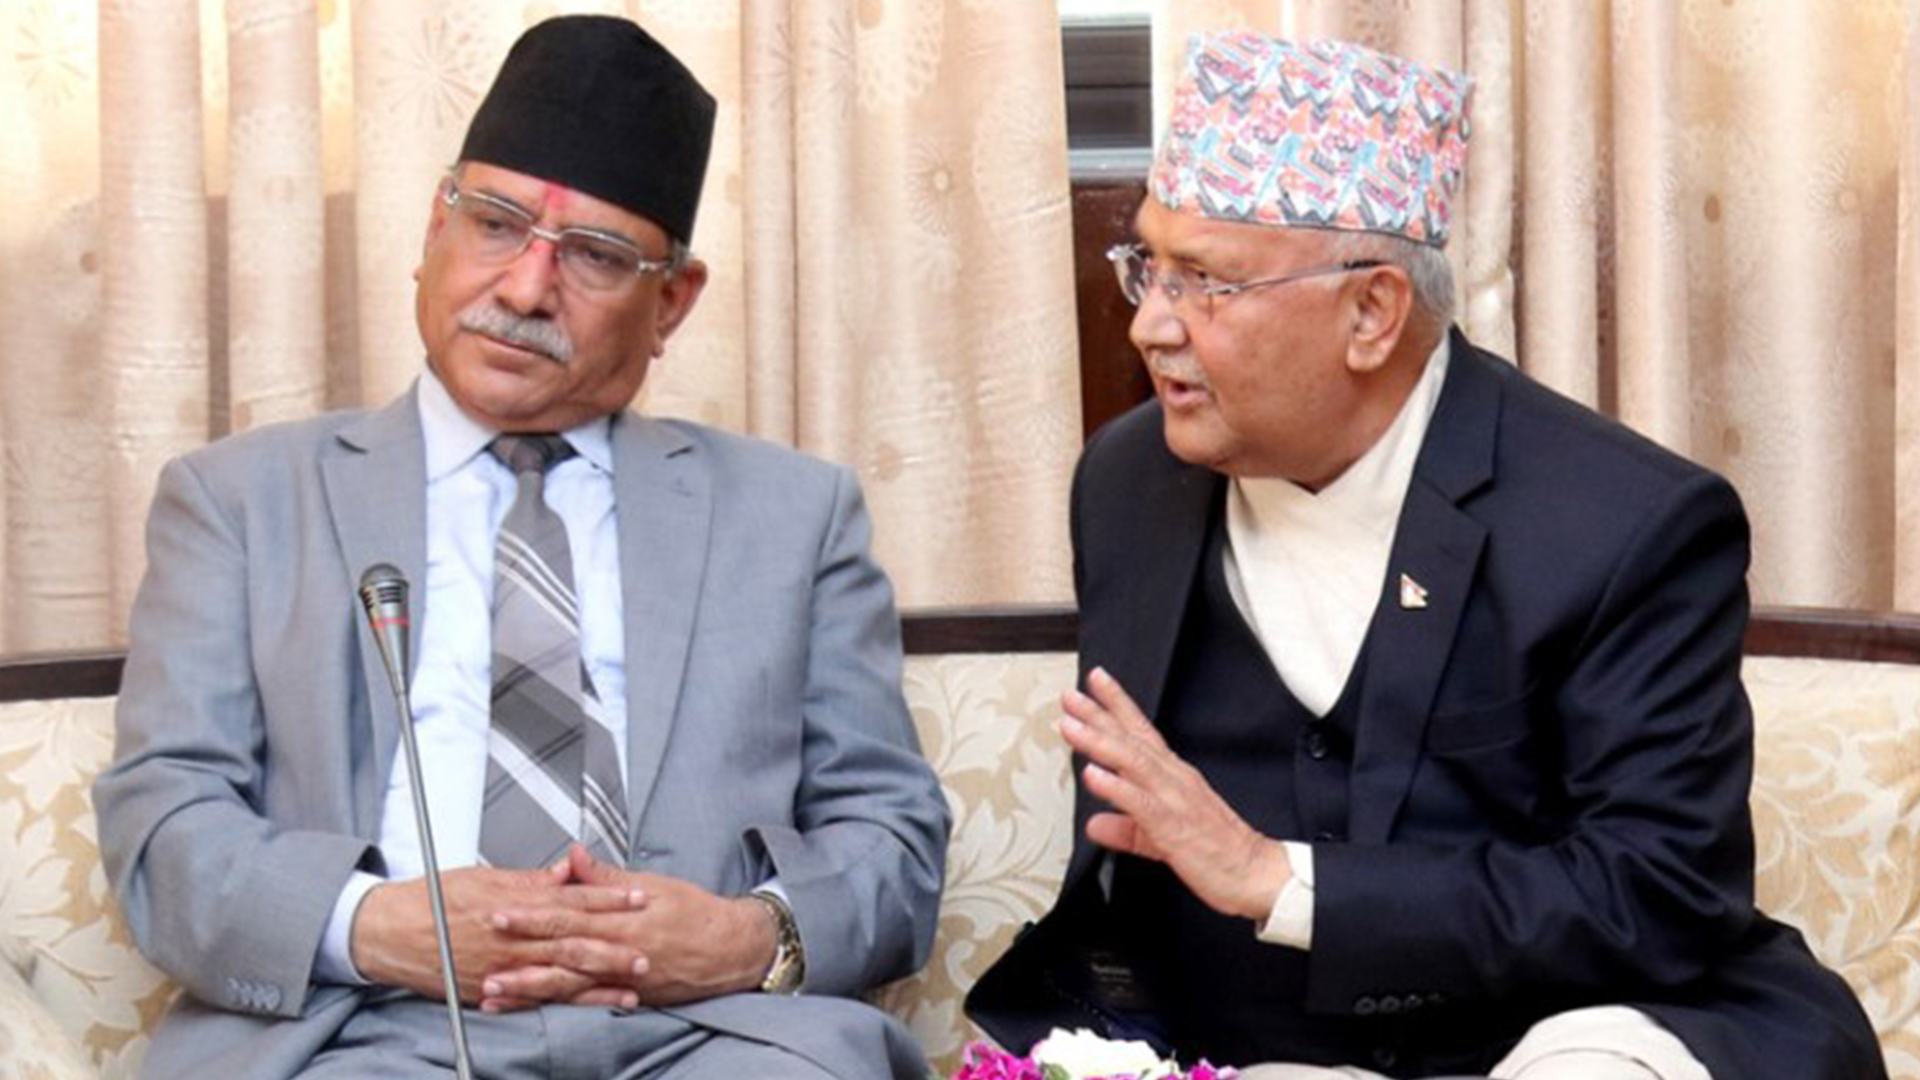 PM Oli and Prachanda’s One-on-One meeting ends